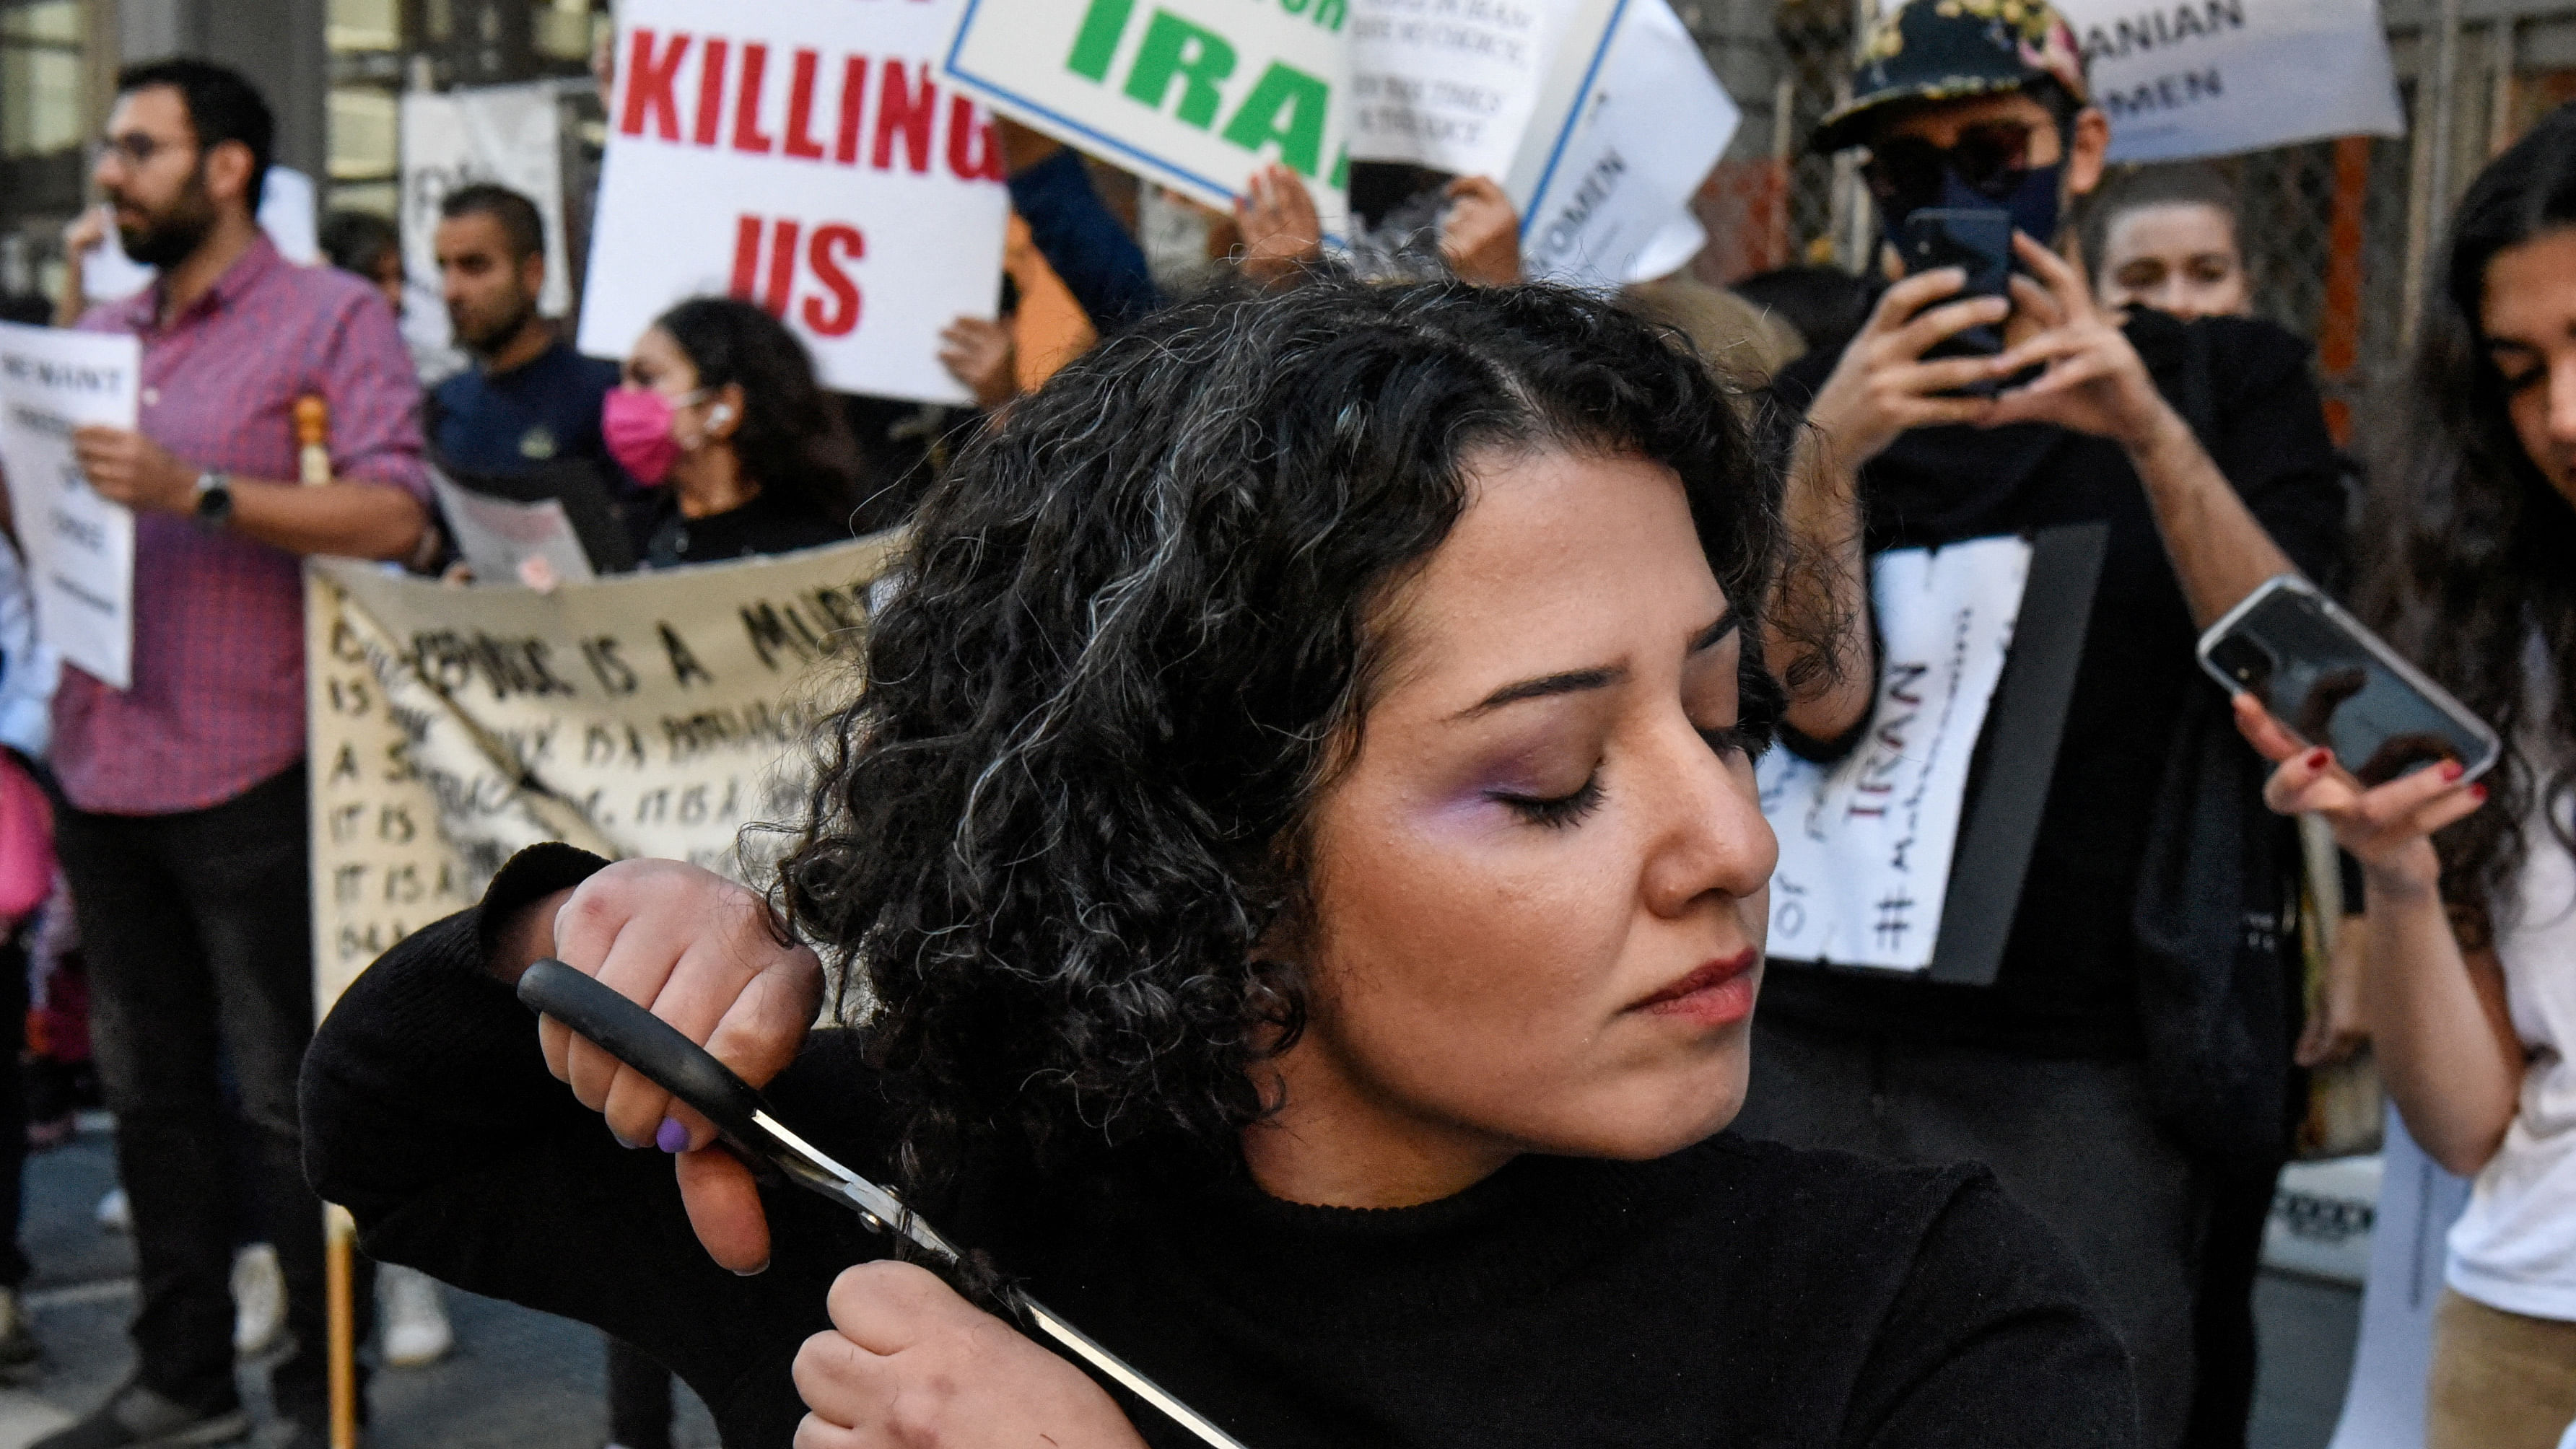 A woman cuts her hair during a protest against the Islamic regime of Iran and the death of Mahsa Amini in New York City. Credit: Reuters Photo